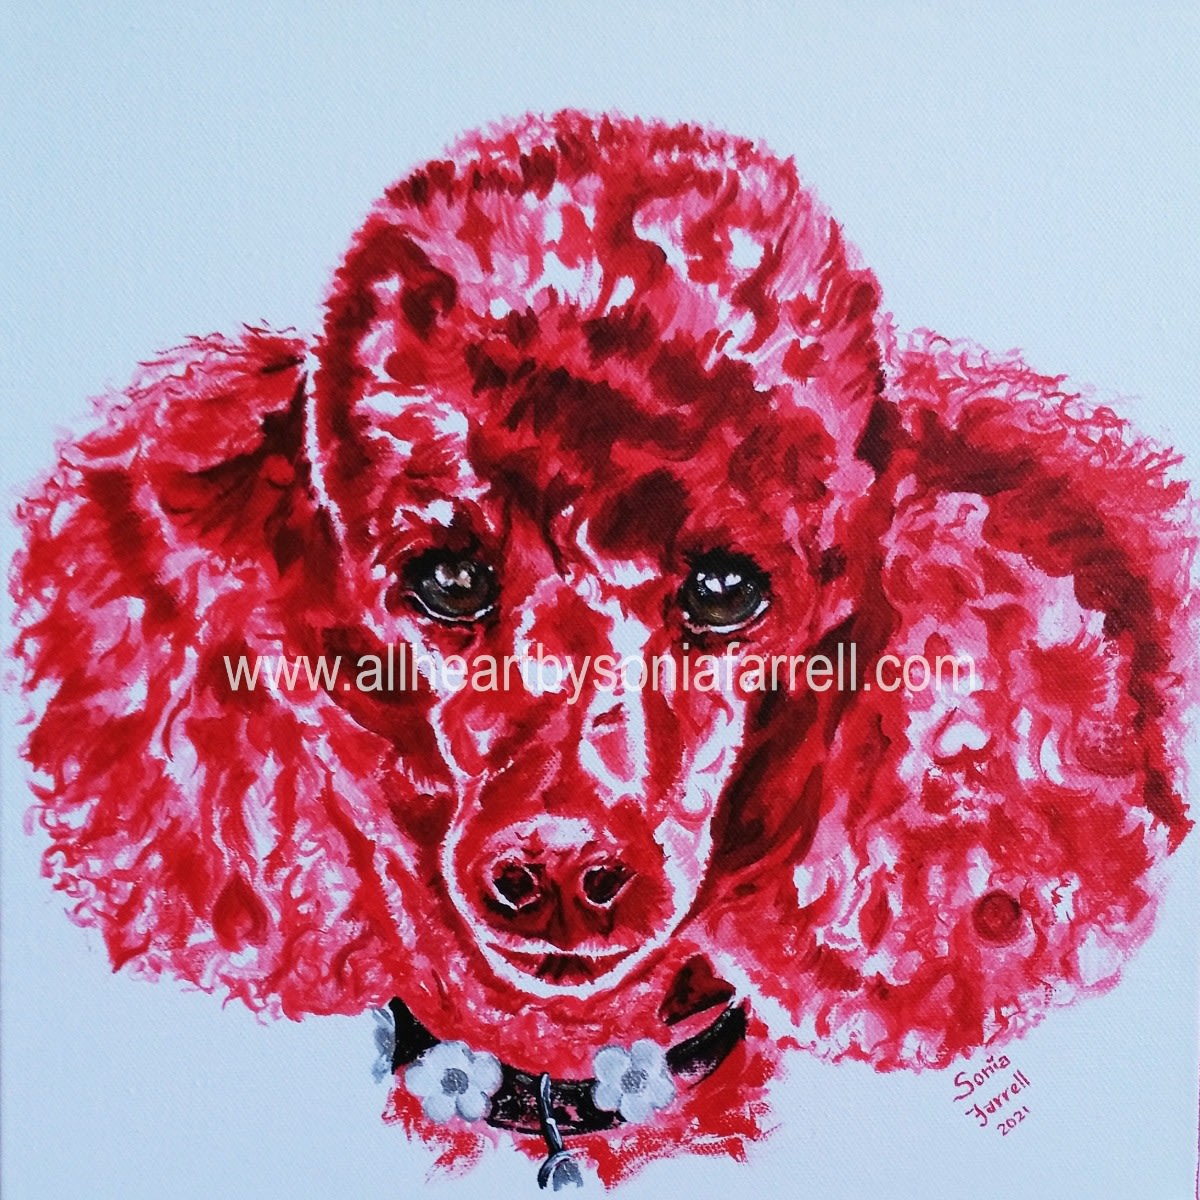 More about Dolly Bird, the French Miniature Poodle